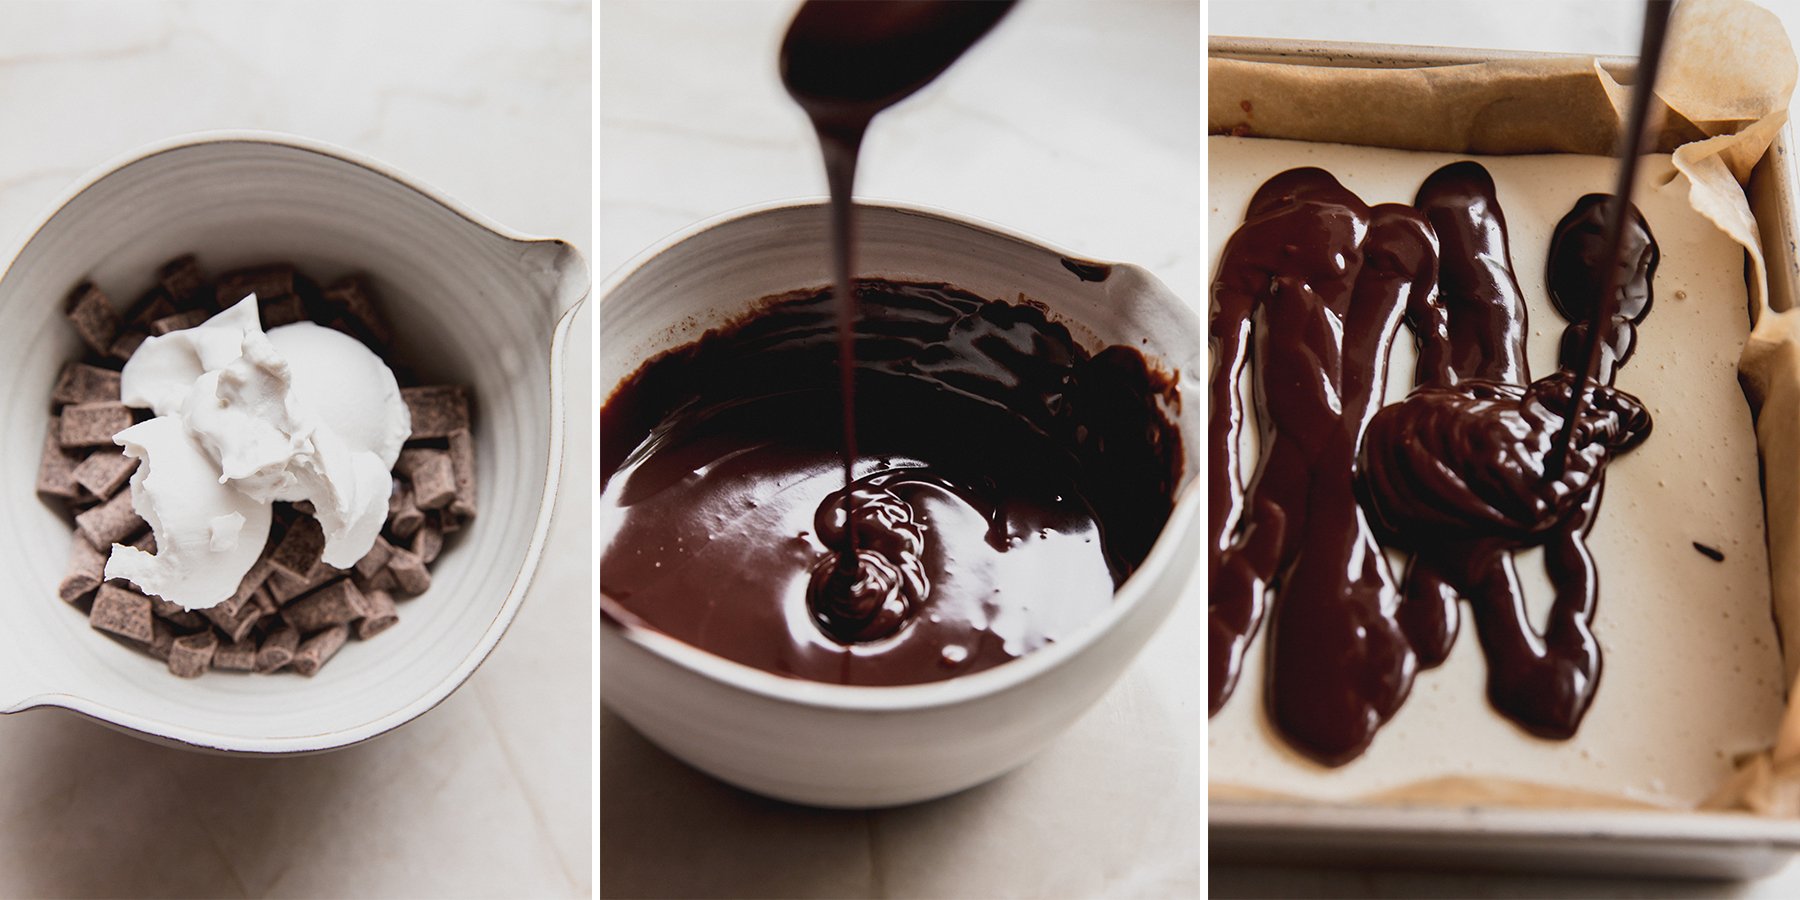 Step by step photos of making the melted chocolate and adding it to the s'mores bars.